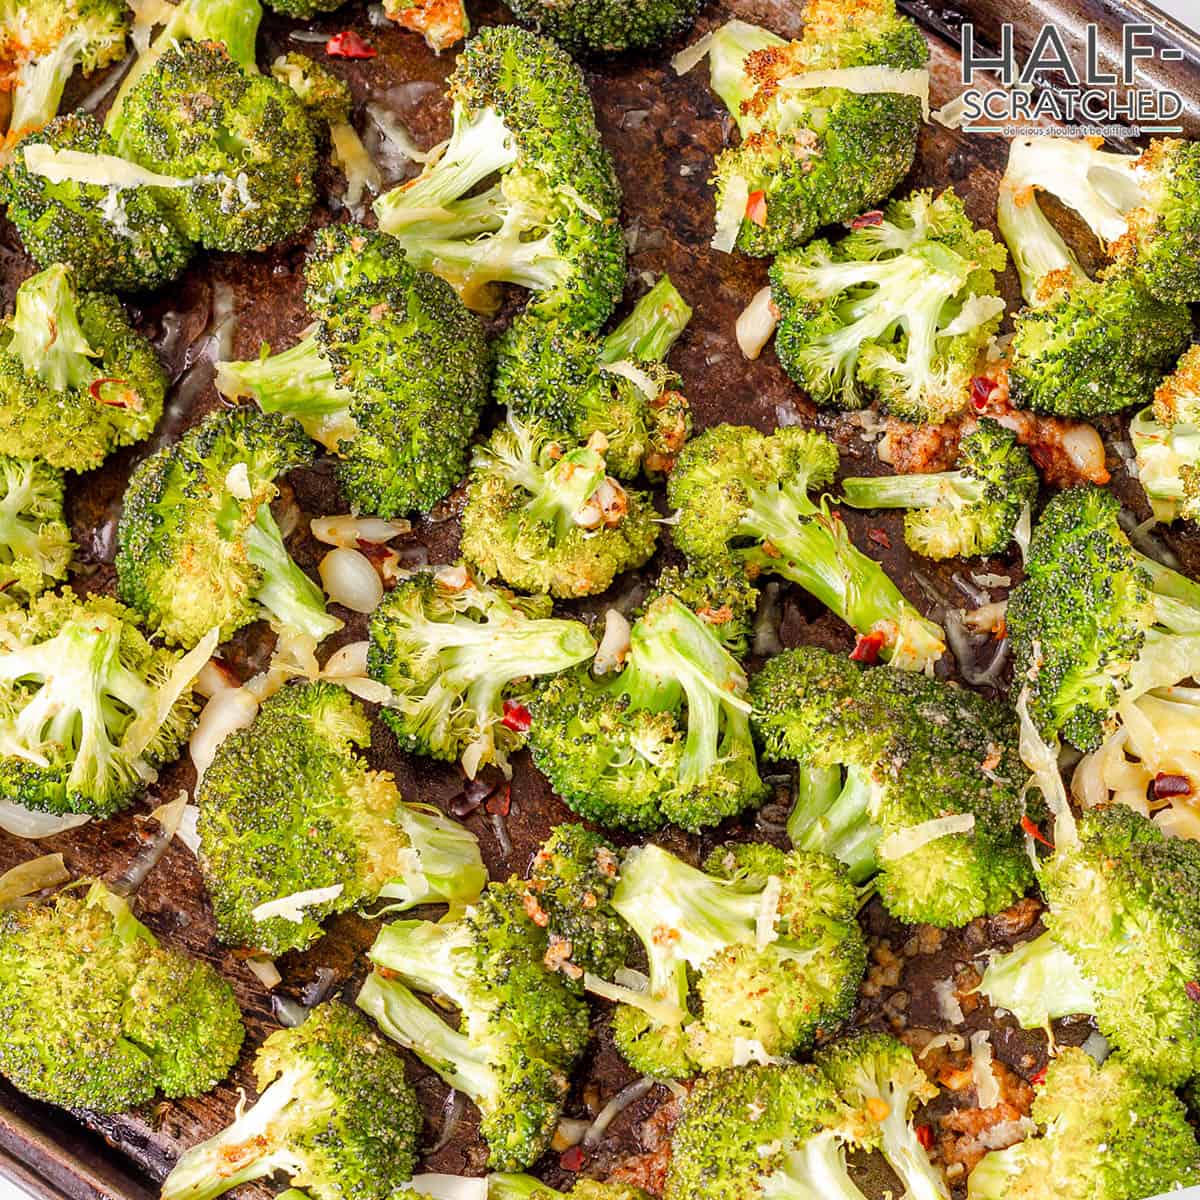 Broccoli in oven at 400F